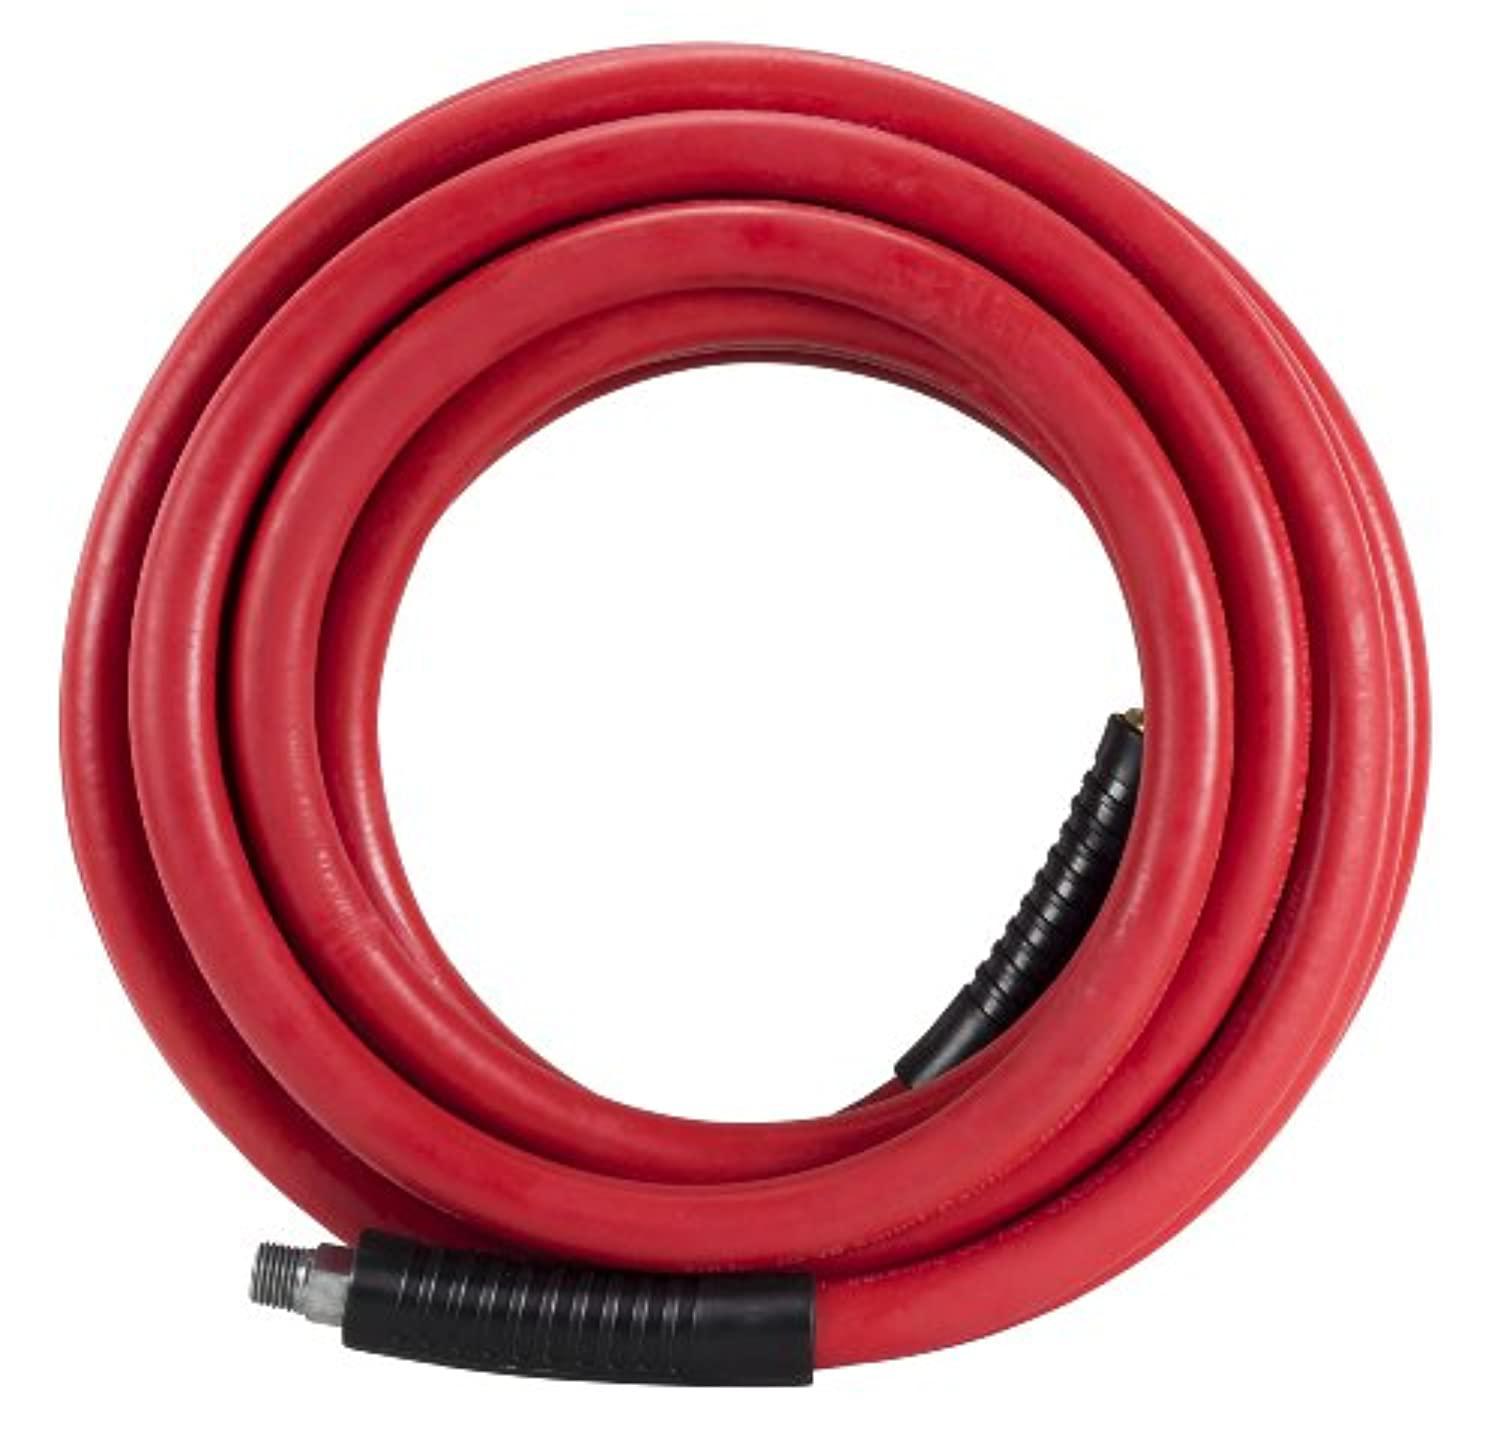 Snap-on Official Licensed Product snap-on 870214 rubber air hose, 3/8-inch x 50-feet